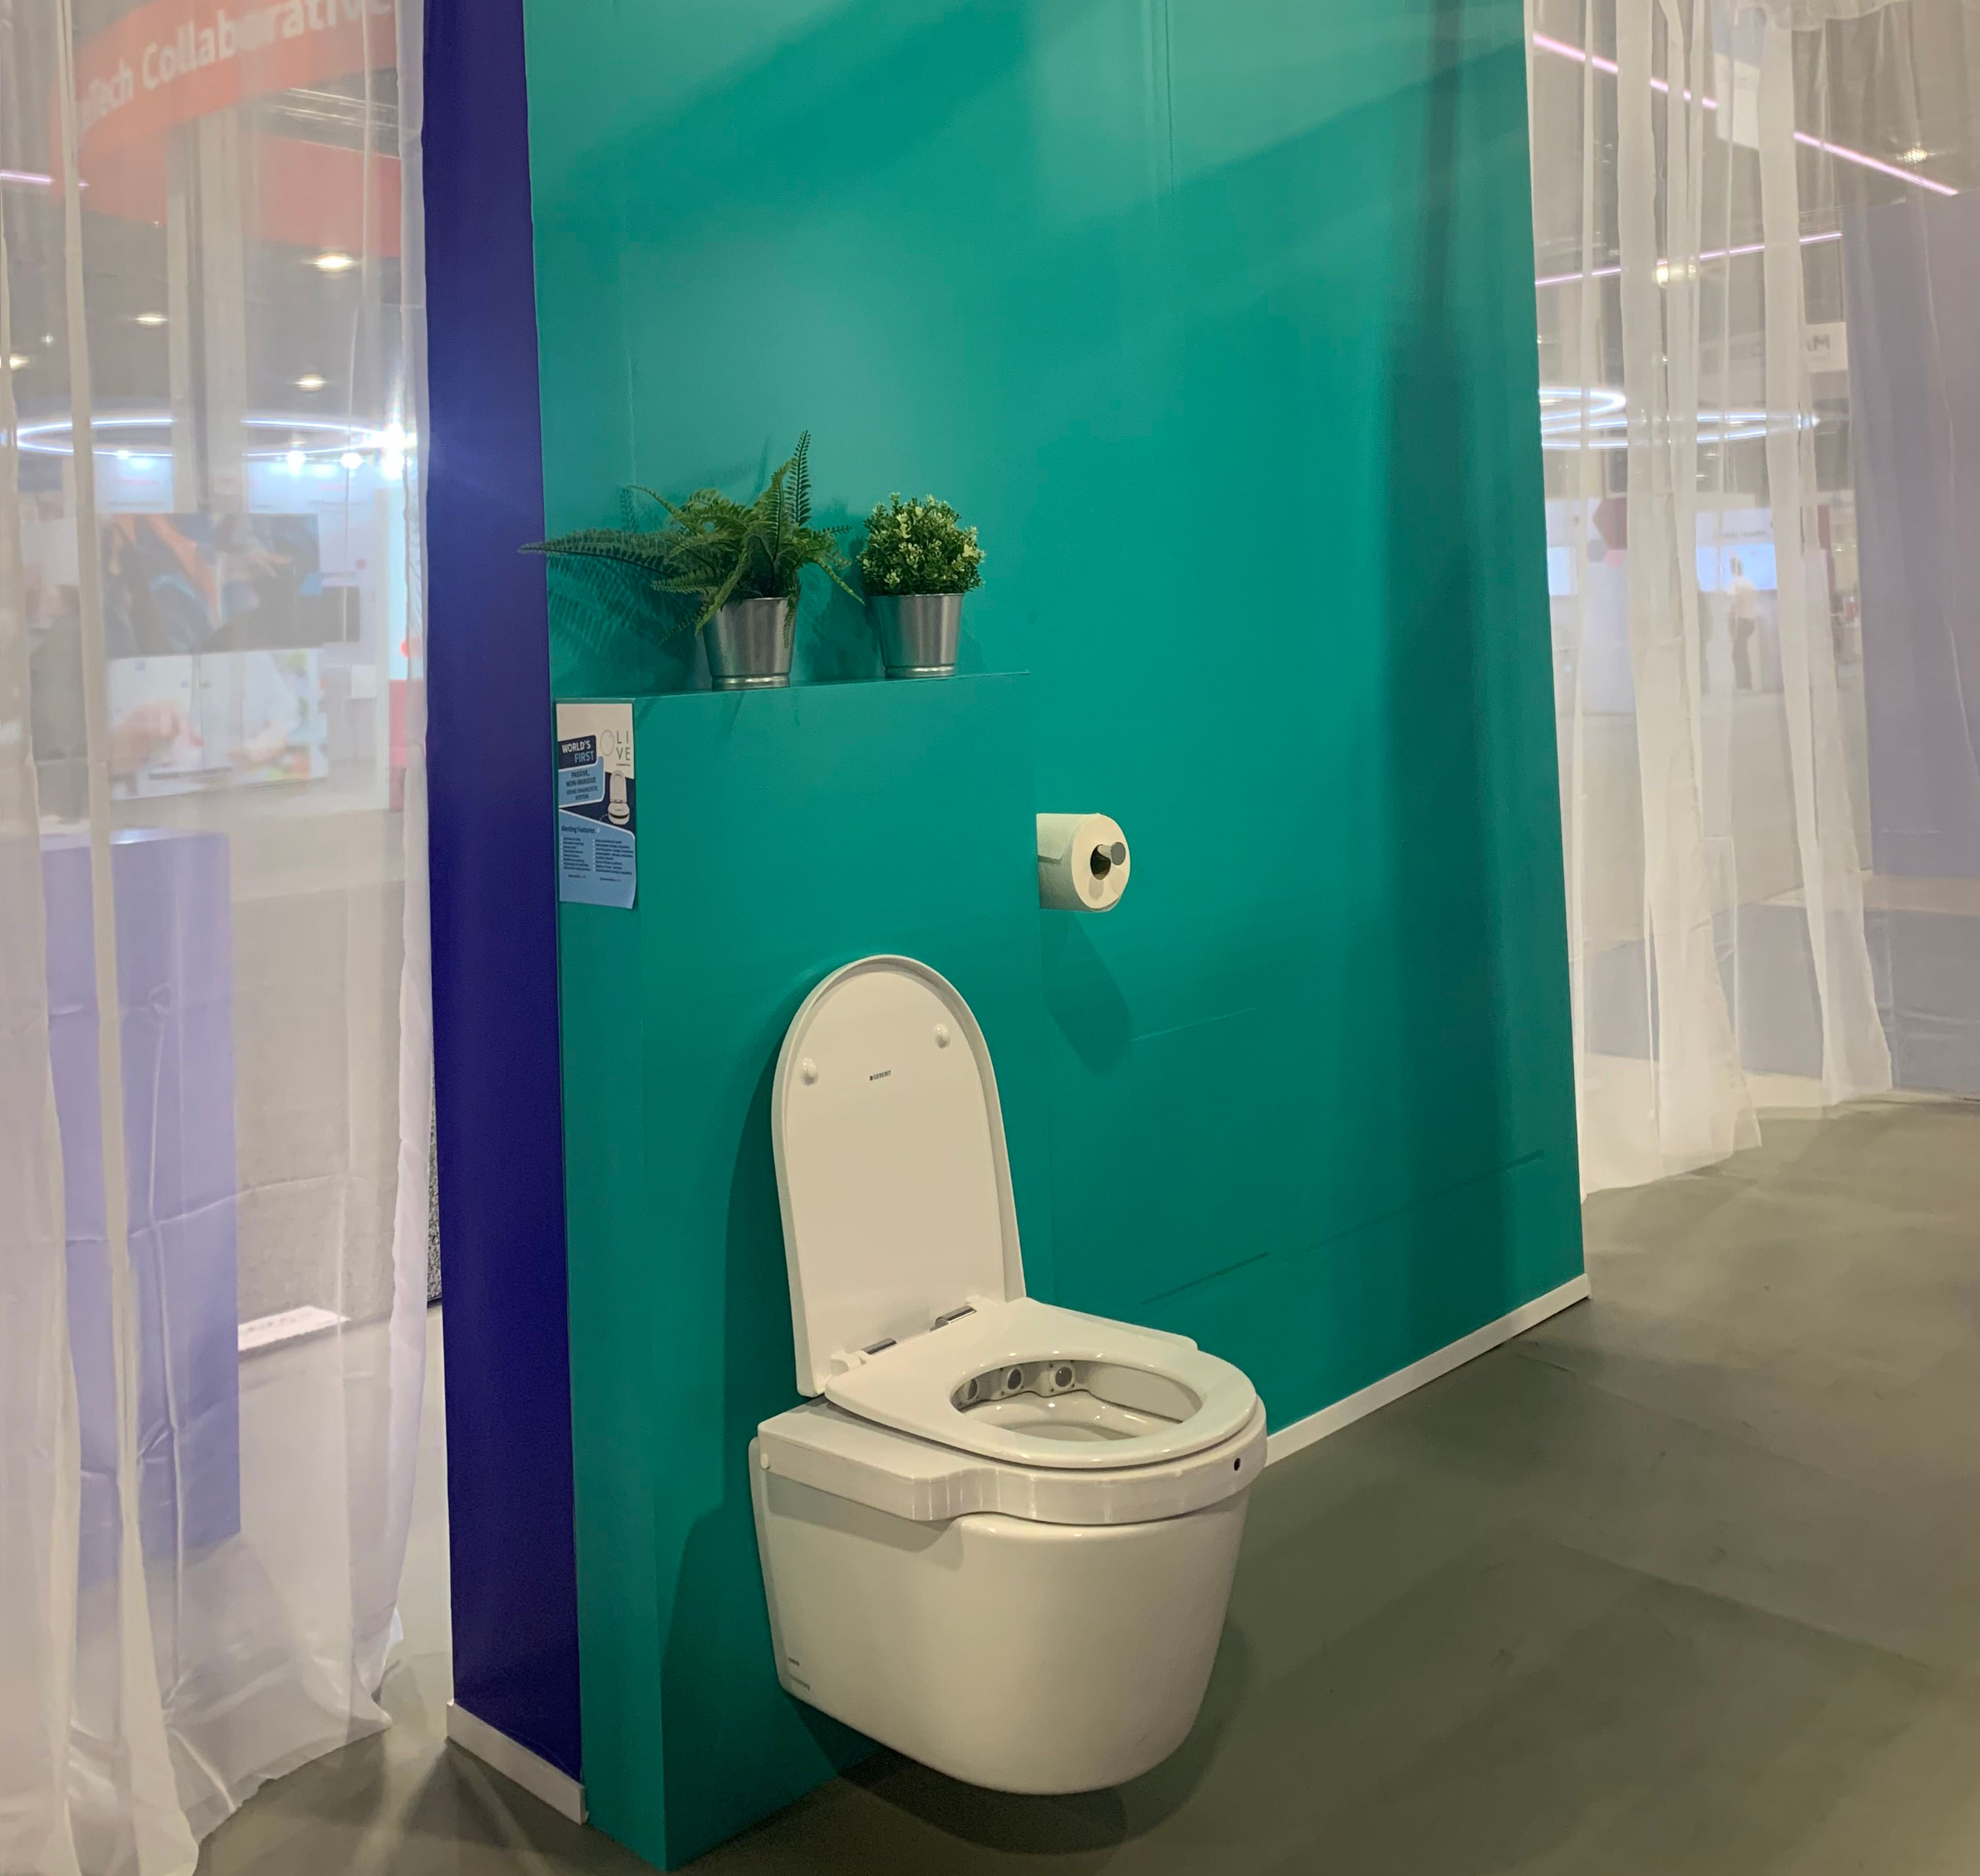 Olive toilet at CES